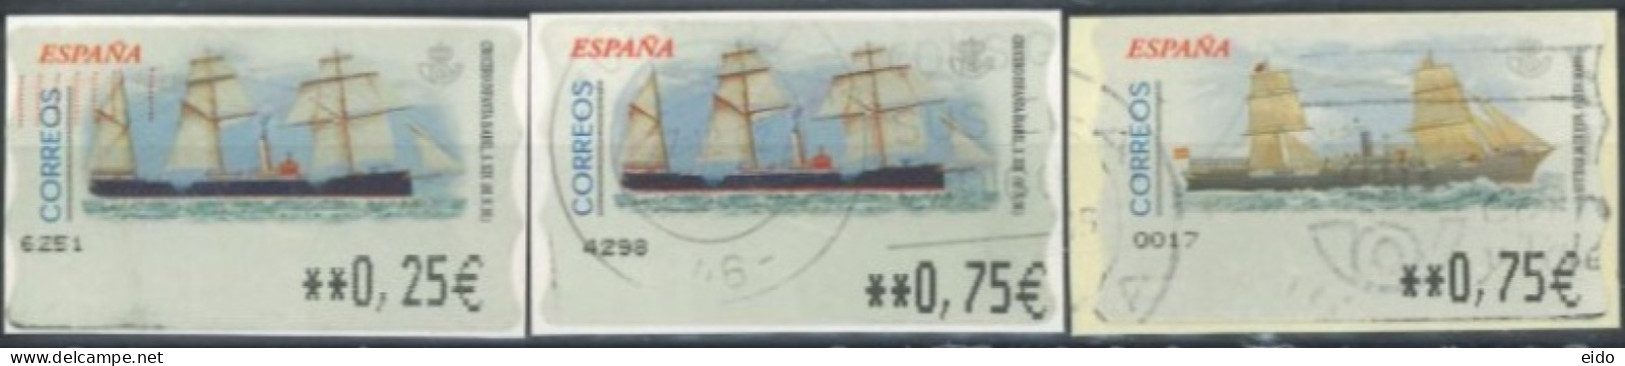 SPAIN- 2002, VANTIGE BOATS STAMPS LABELS SET OF 3, DIFFERENT VALUES, USED. - Usati